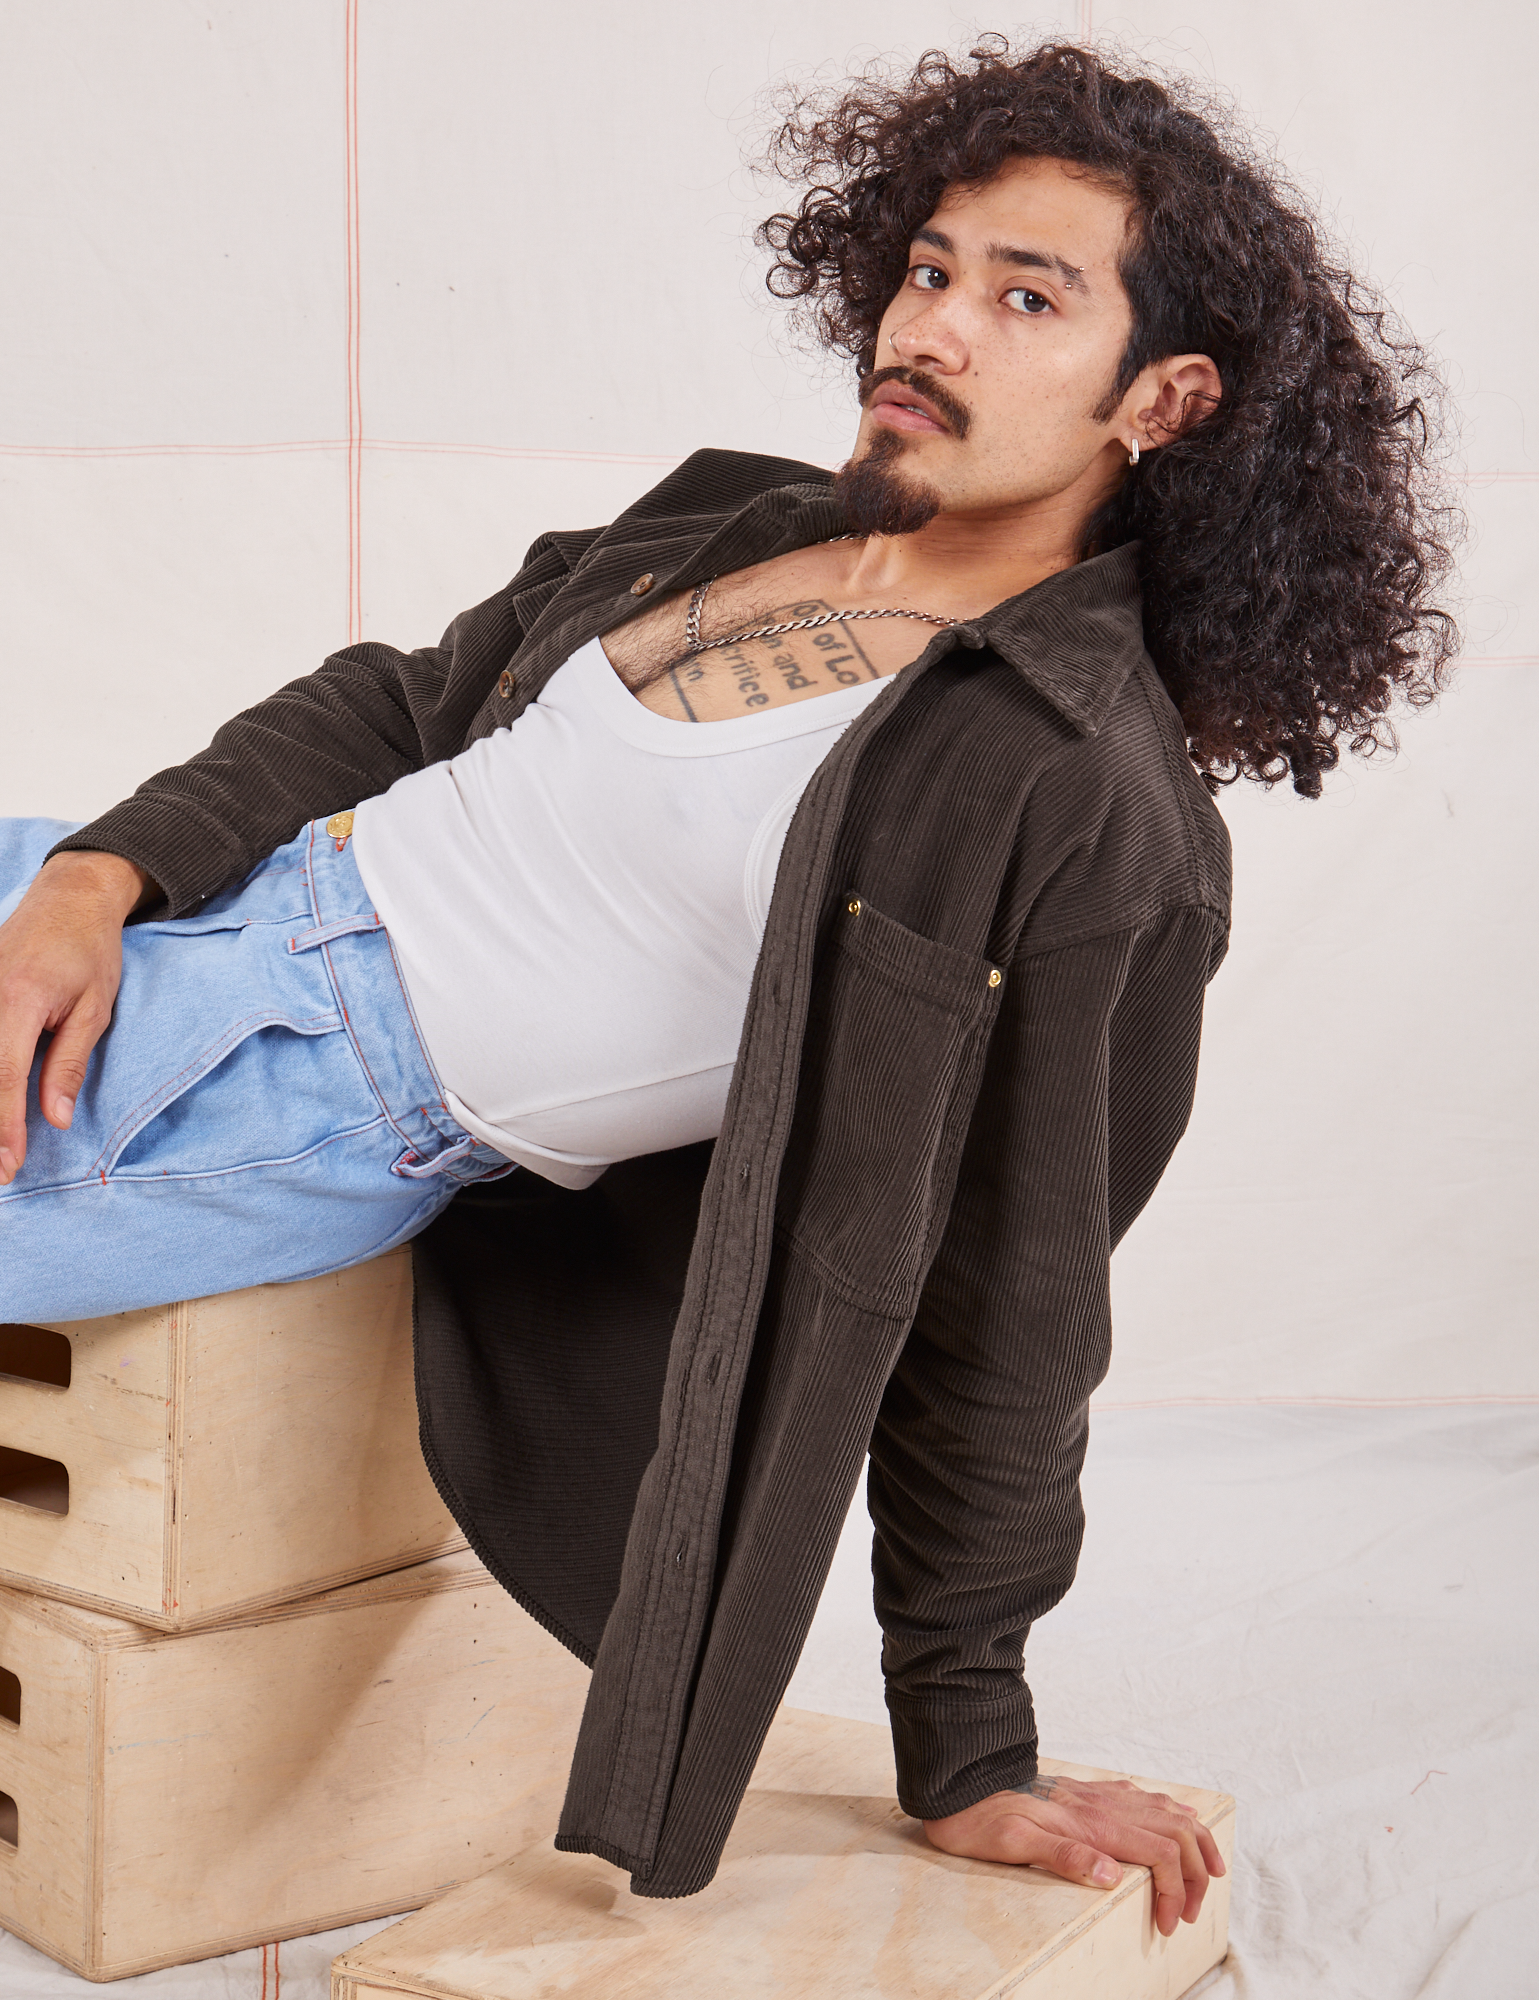 Jesse is wearing Corduroy Overshirt in Espresso Brown and a vintage off-white Cropped Tank Top underneath